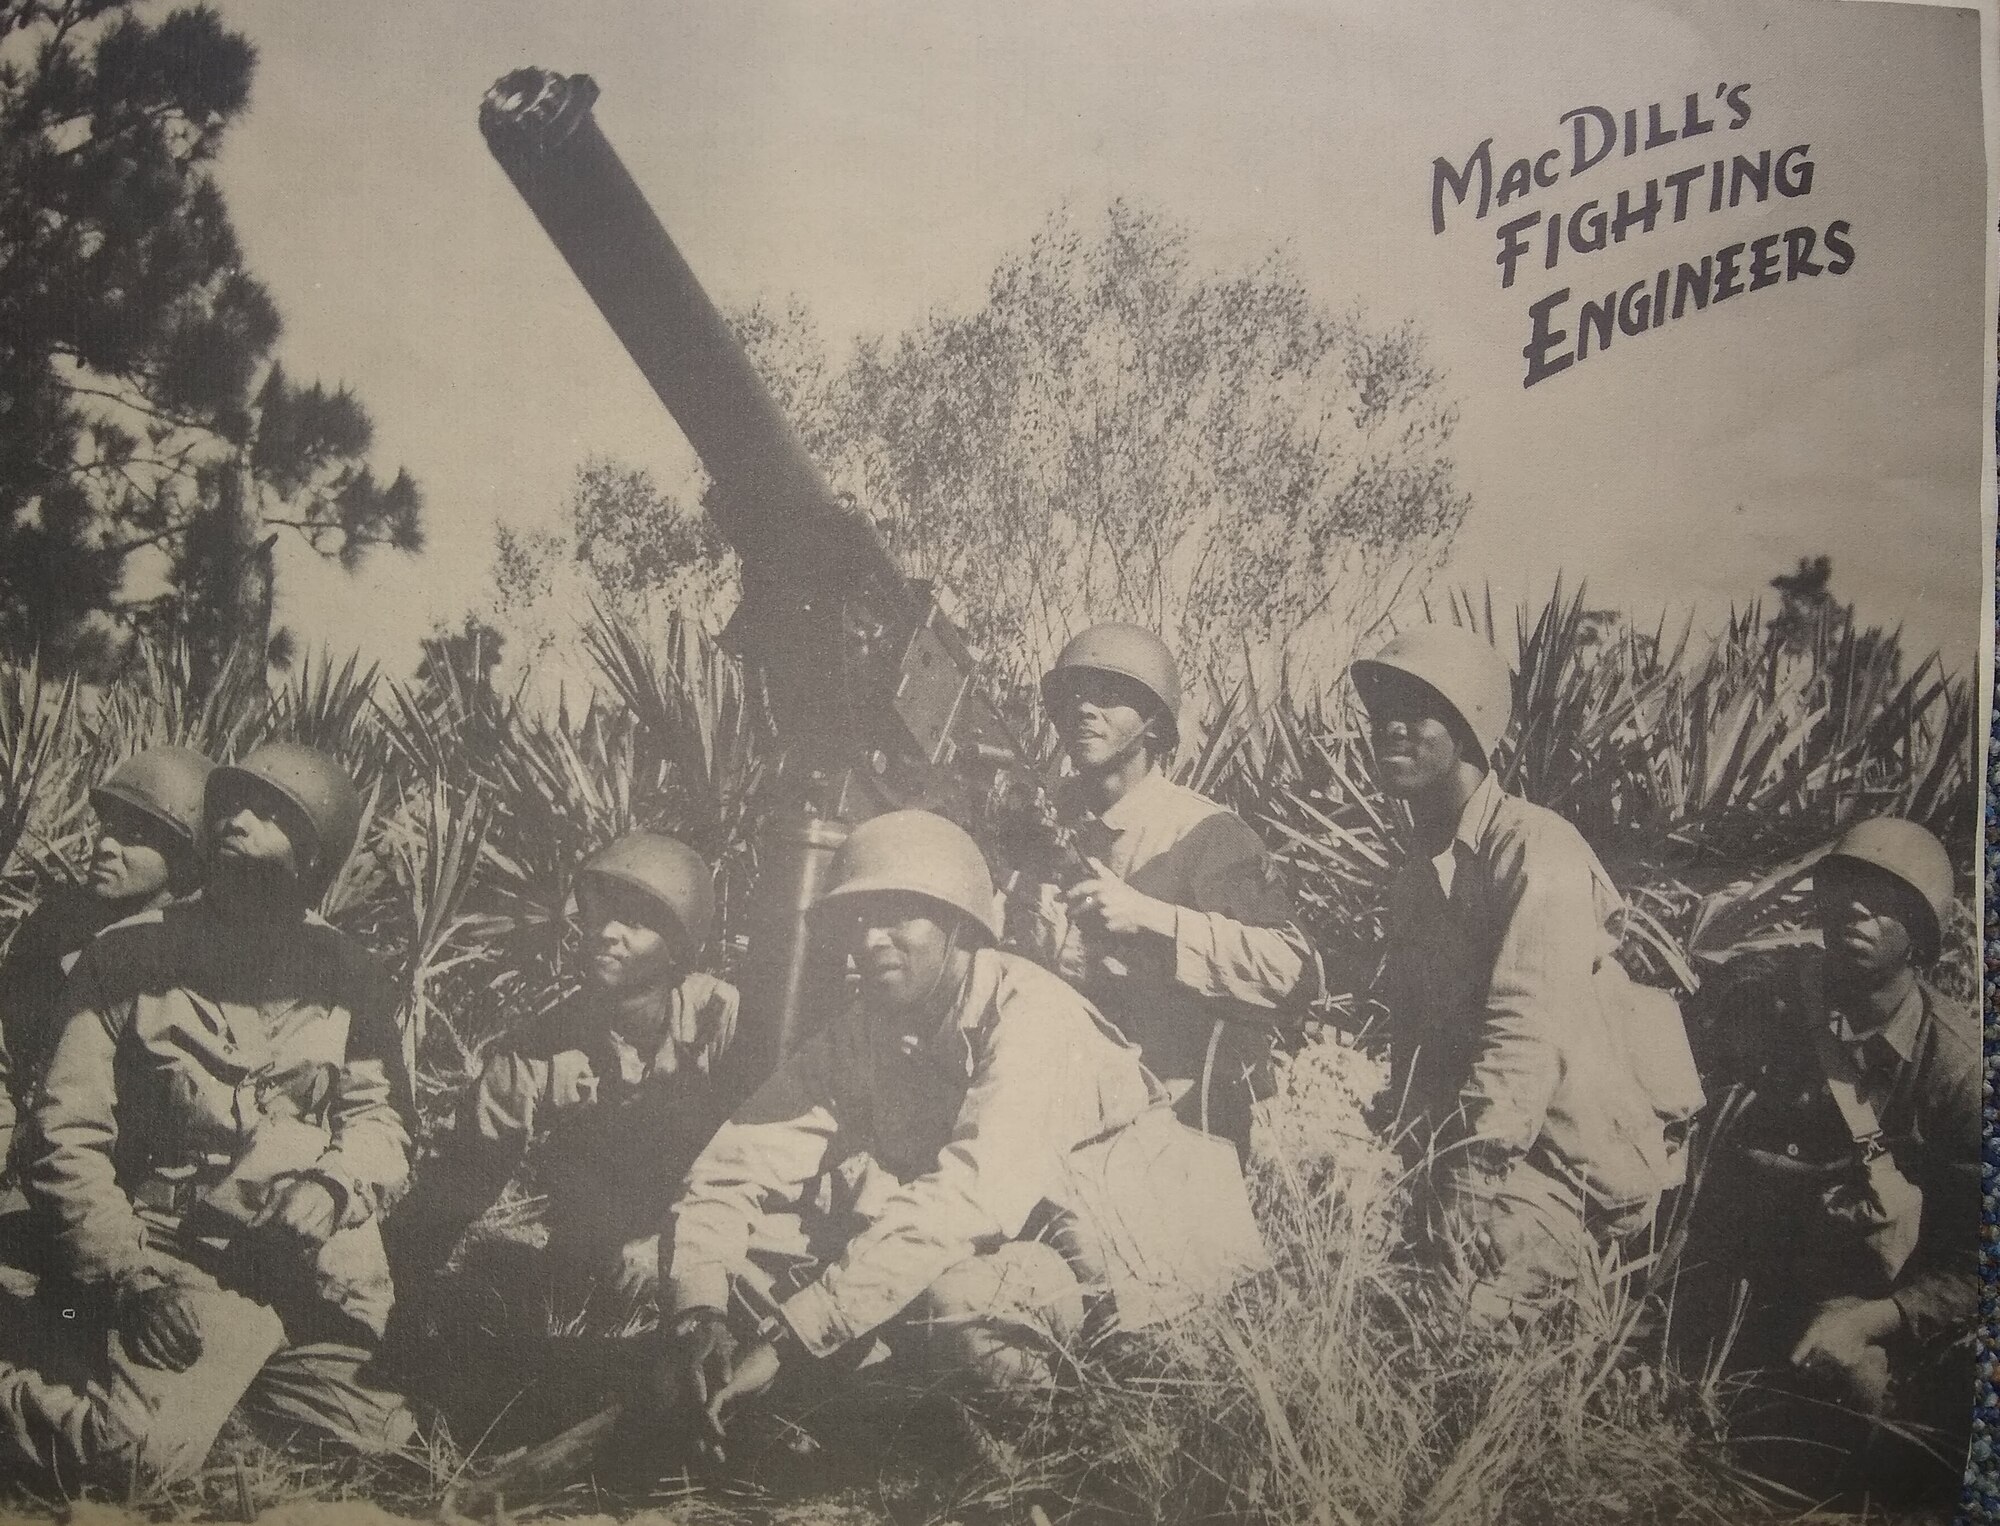 U.S. Army Air Corps African American “Fighting Engineers” at MacDill Air Force Base, Florida, are shown in a World War II-era photograph. These expeditionary service members built and sustained airfields needed to advance Allied airpower from the shores of the continental United States to Tokyo and Berlin by the end of WWII. A heritage marker installed by the 6th Civil Engineer Squadron June 24, 2022, identifies the location of the “Black Troops” service area on MacDill AFB at the current Army and Air Force Exchange Service Main Exchange Mall Building 925A. The heritage marker is one of twelve markers on MacDill AFB and South Tampa where base personnel can learn more about all eras of base history. (U.S. Air Force photo)